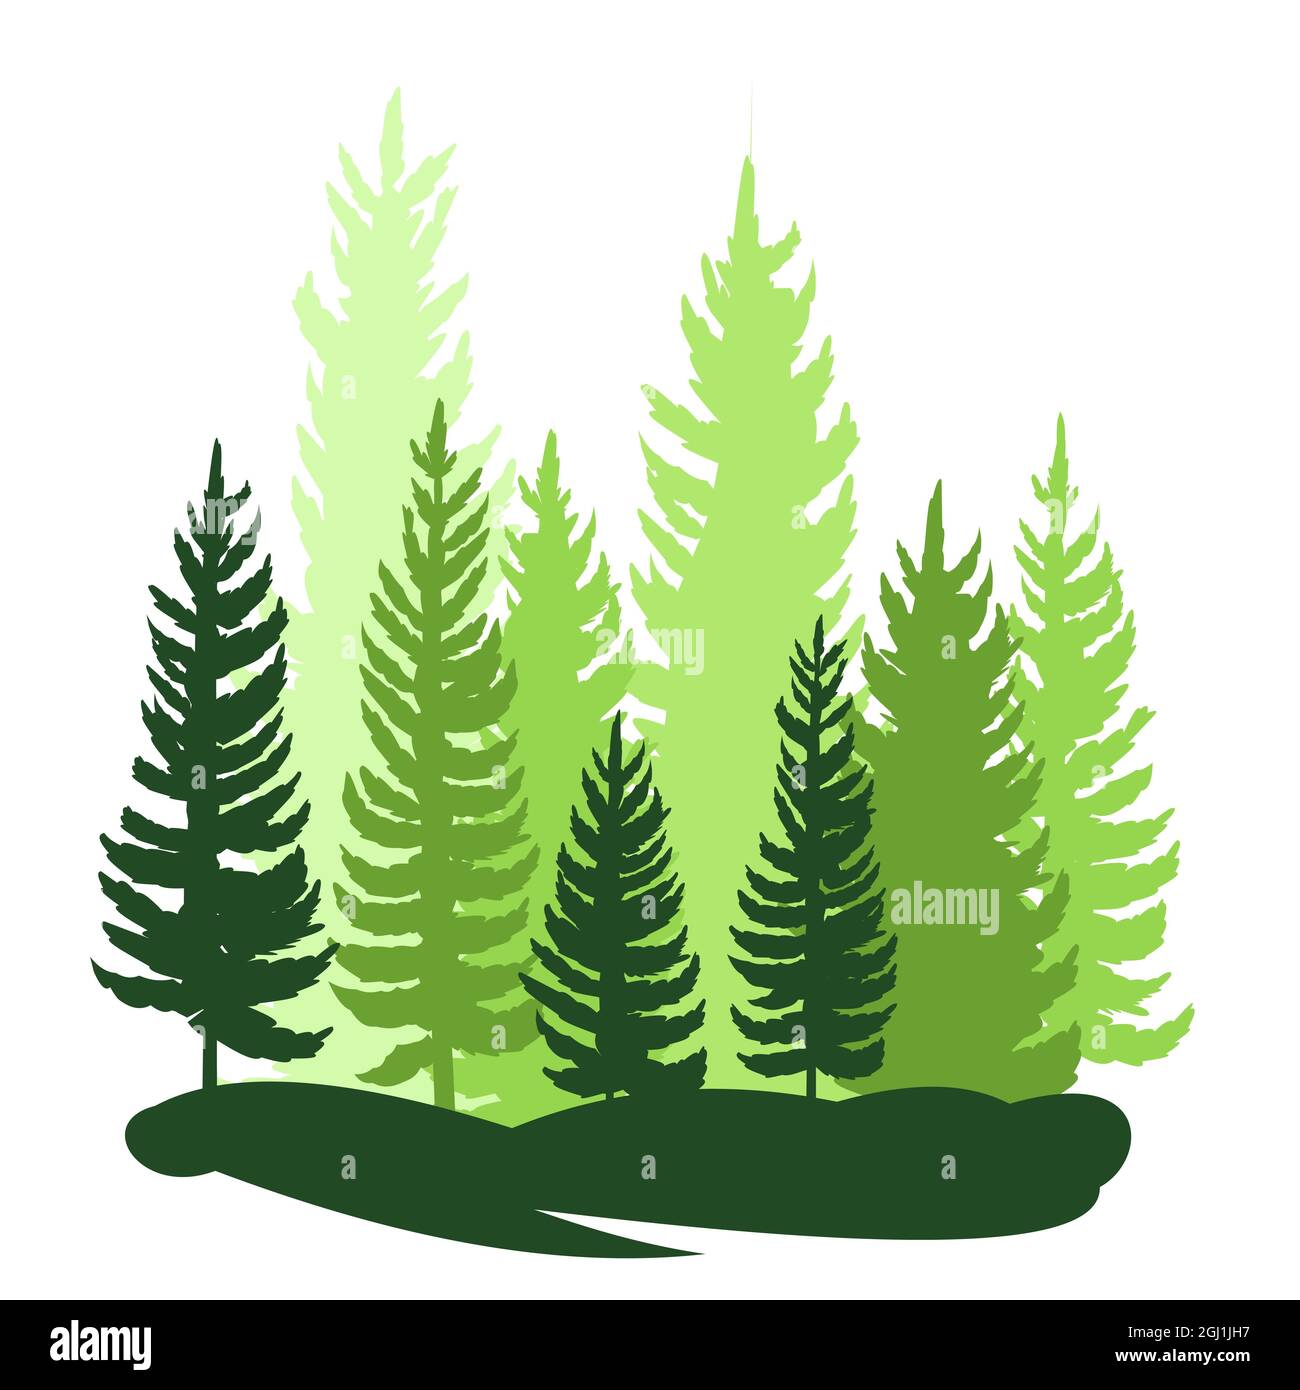 Forest silhouette scene. Landscape with coniferous trees. Beautiful green view. Pine and spruce trees. Summer nature. Isolated illustration vector Stock Vector